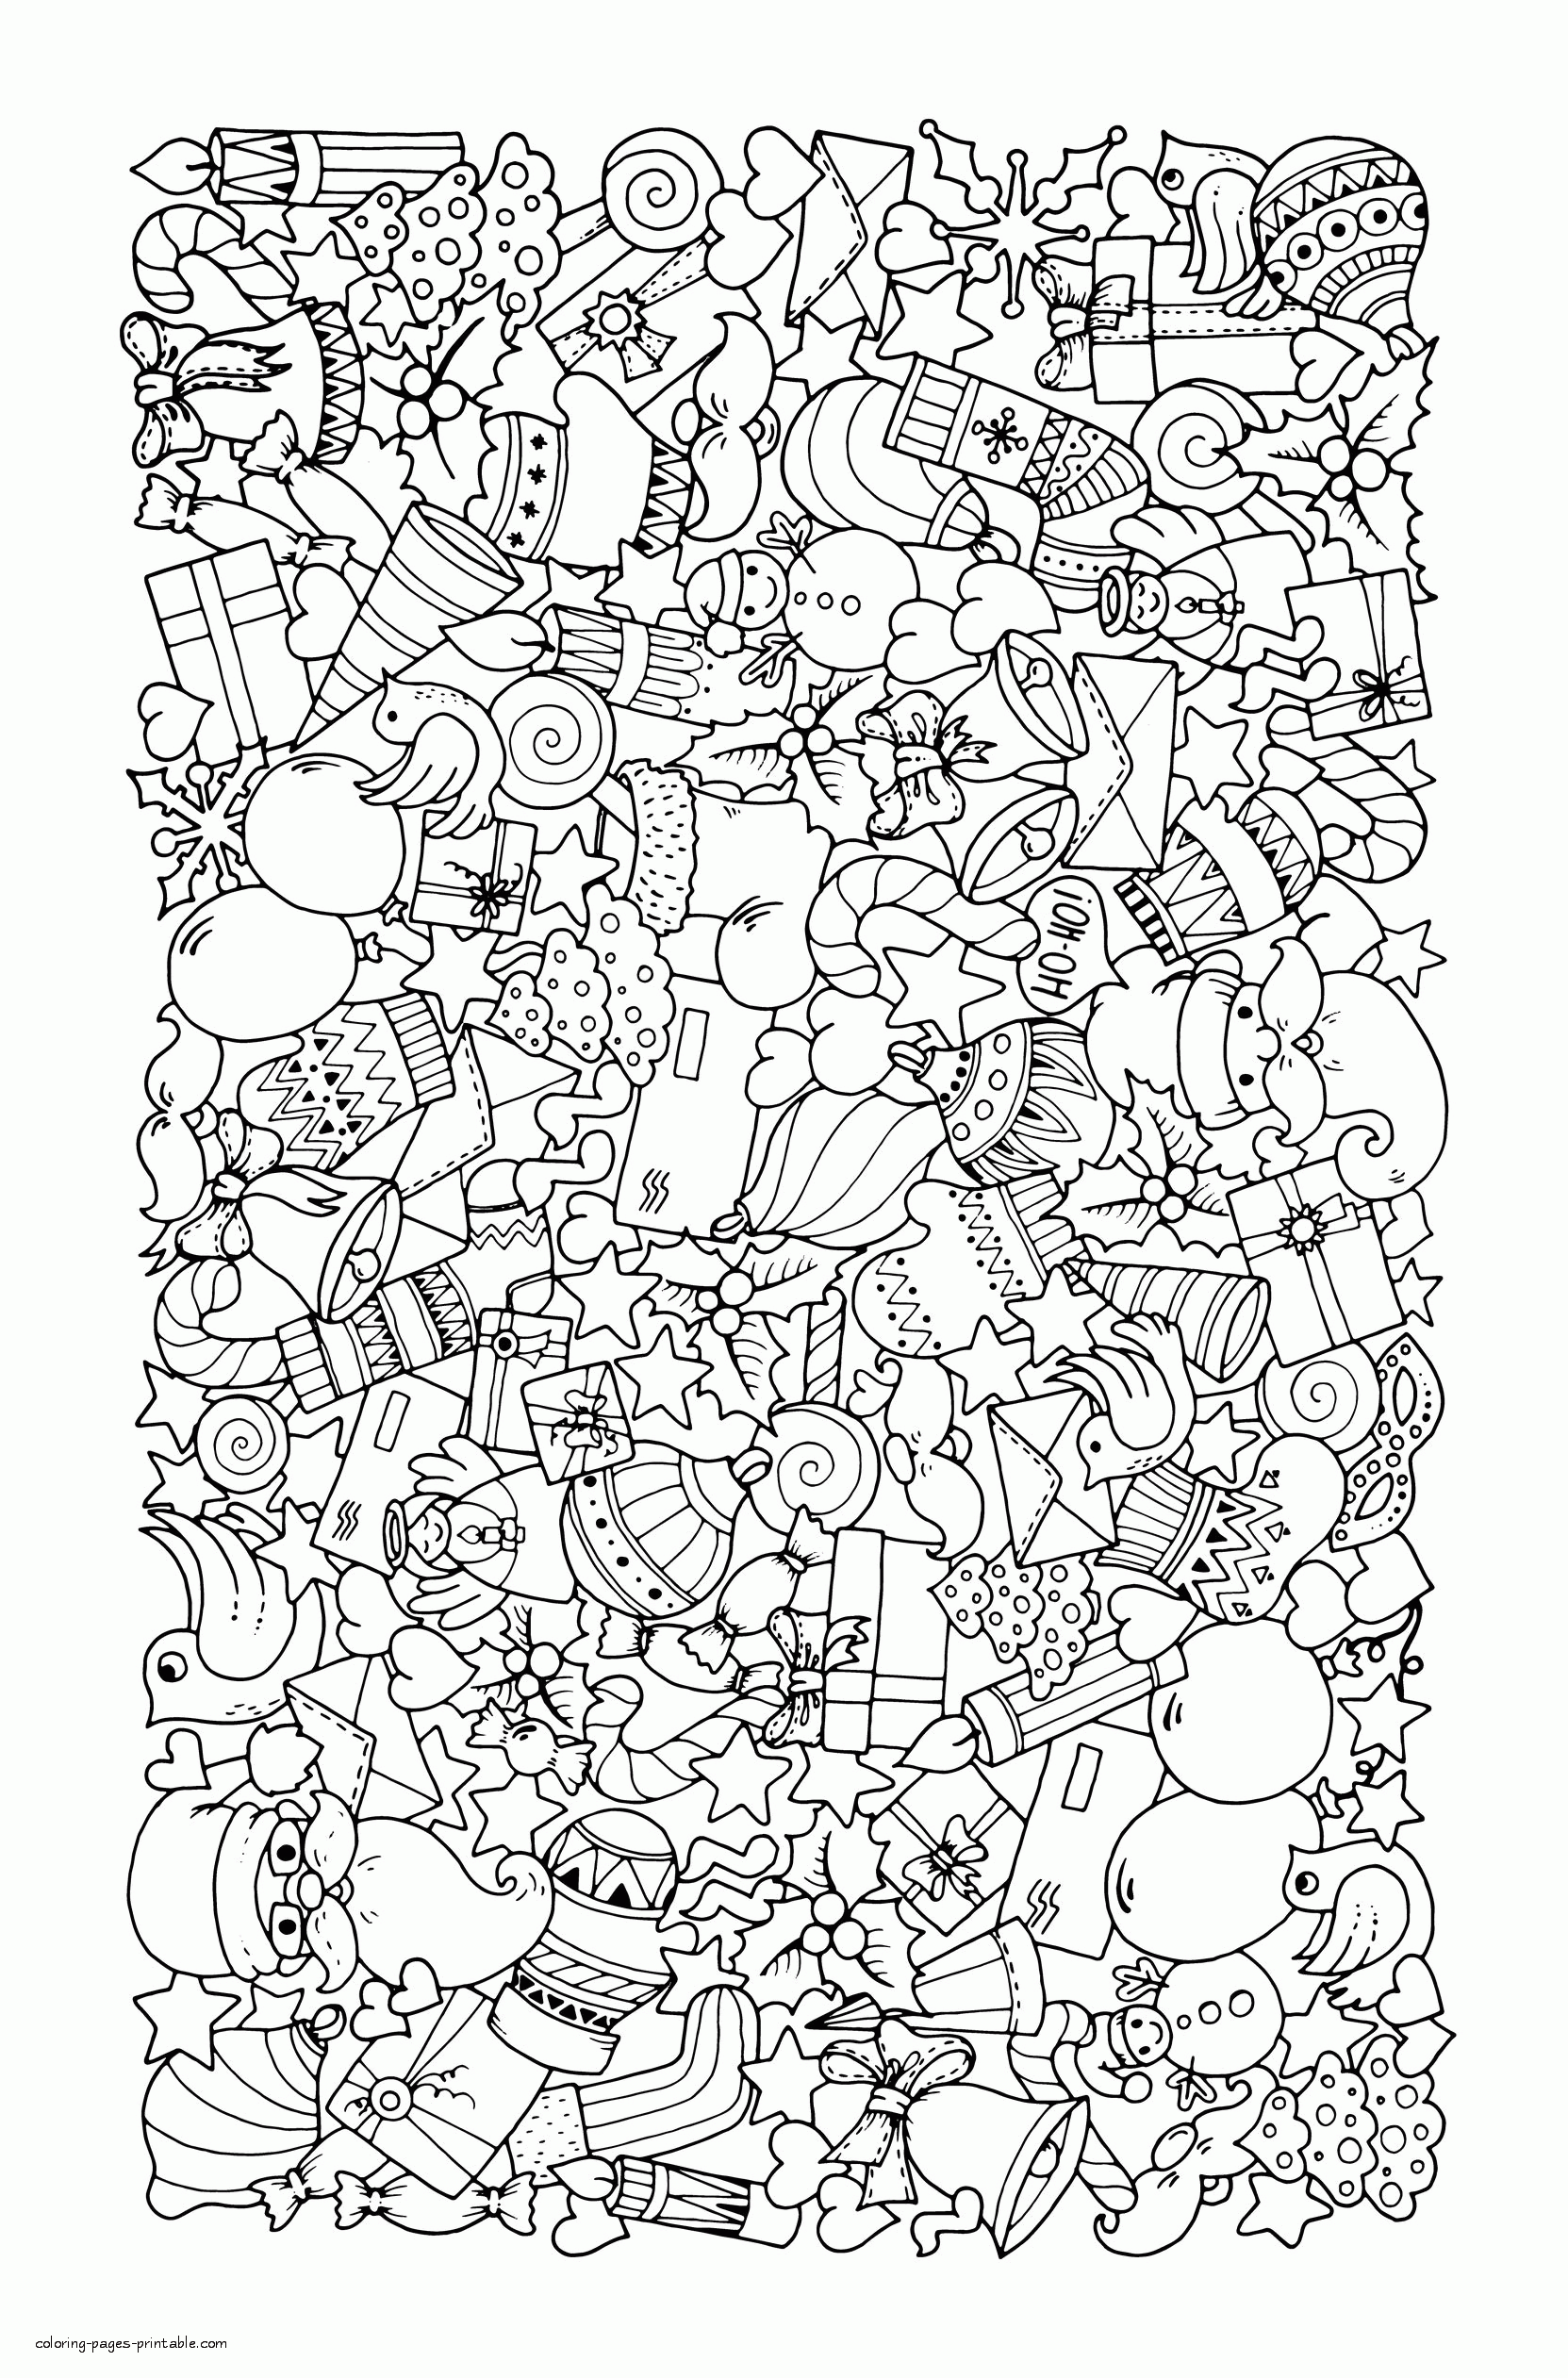 Christmas Doodle Coloring Sheet For Adults || COLORING-PAGES-PRINTABLE.COM